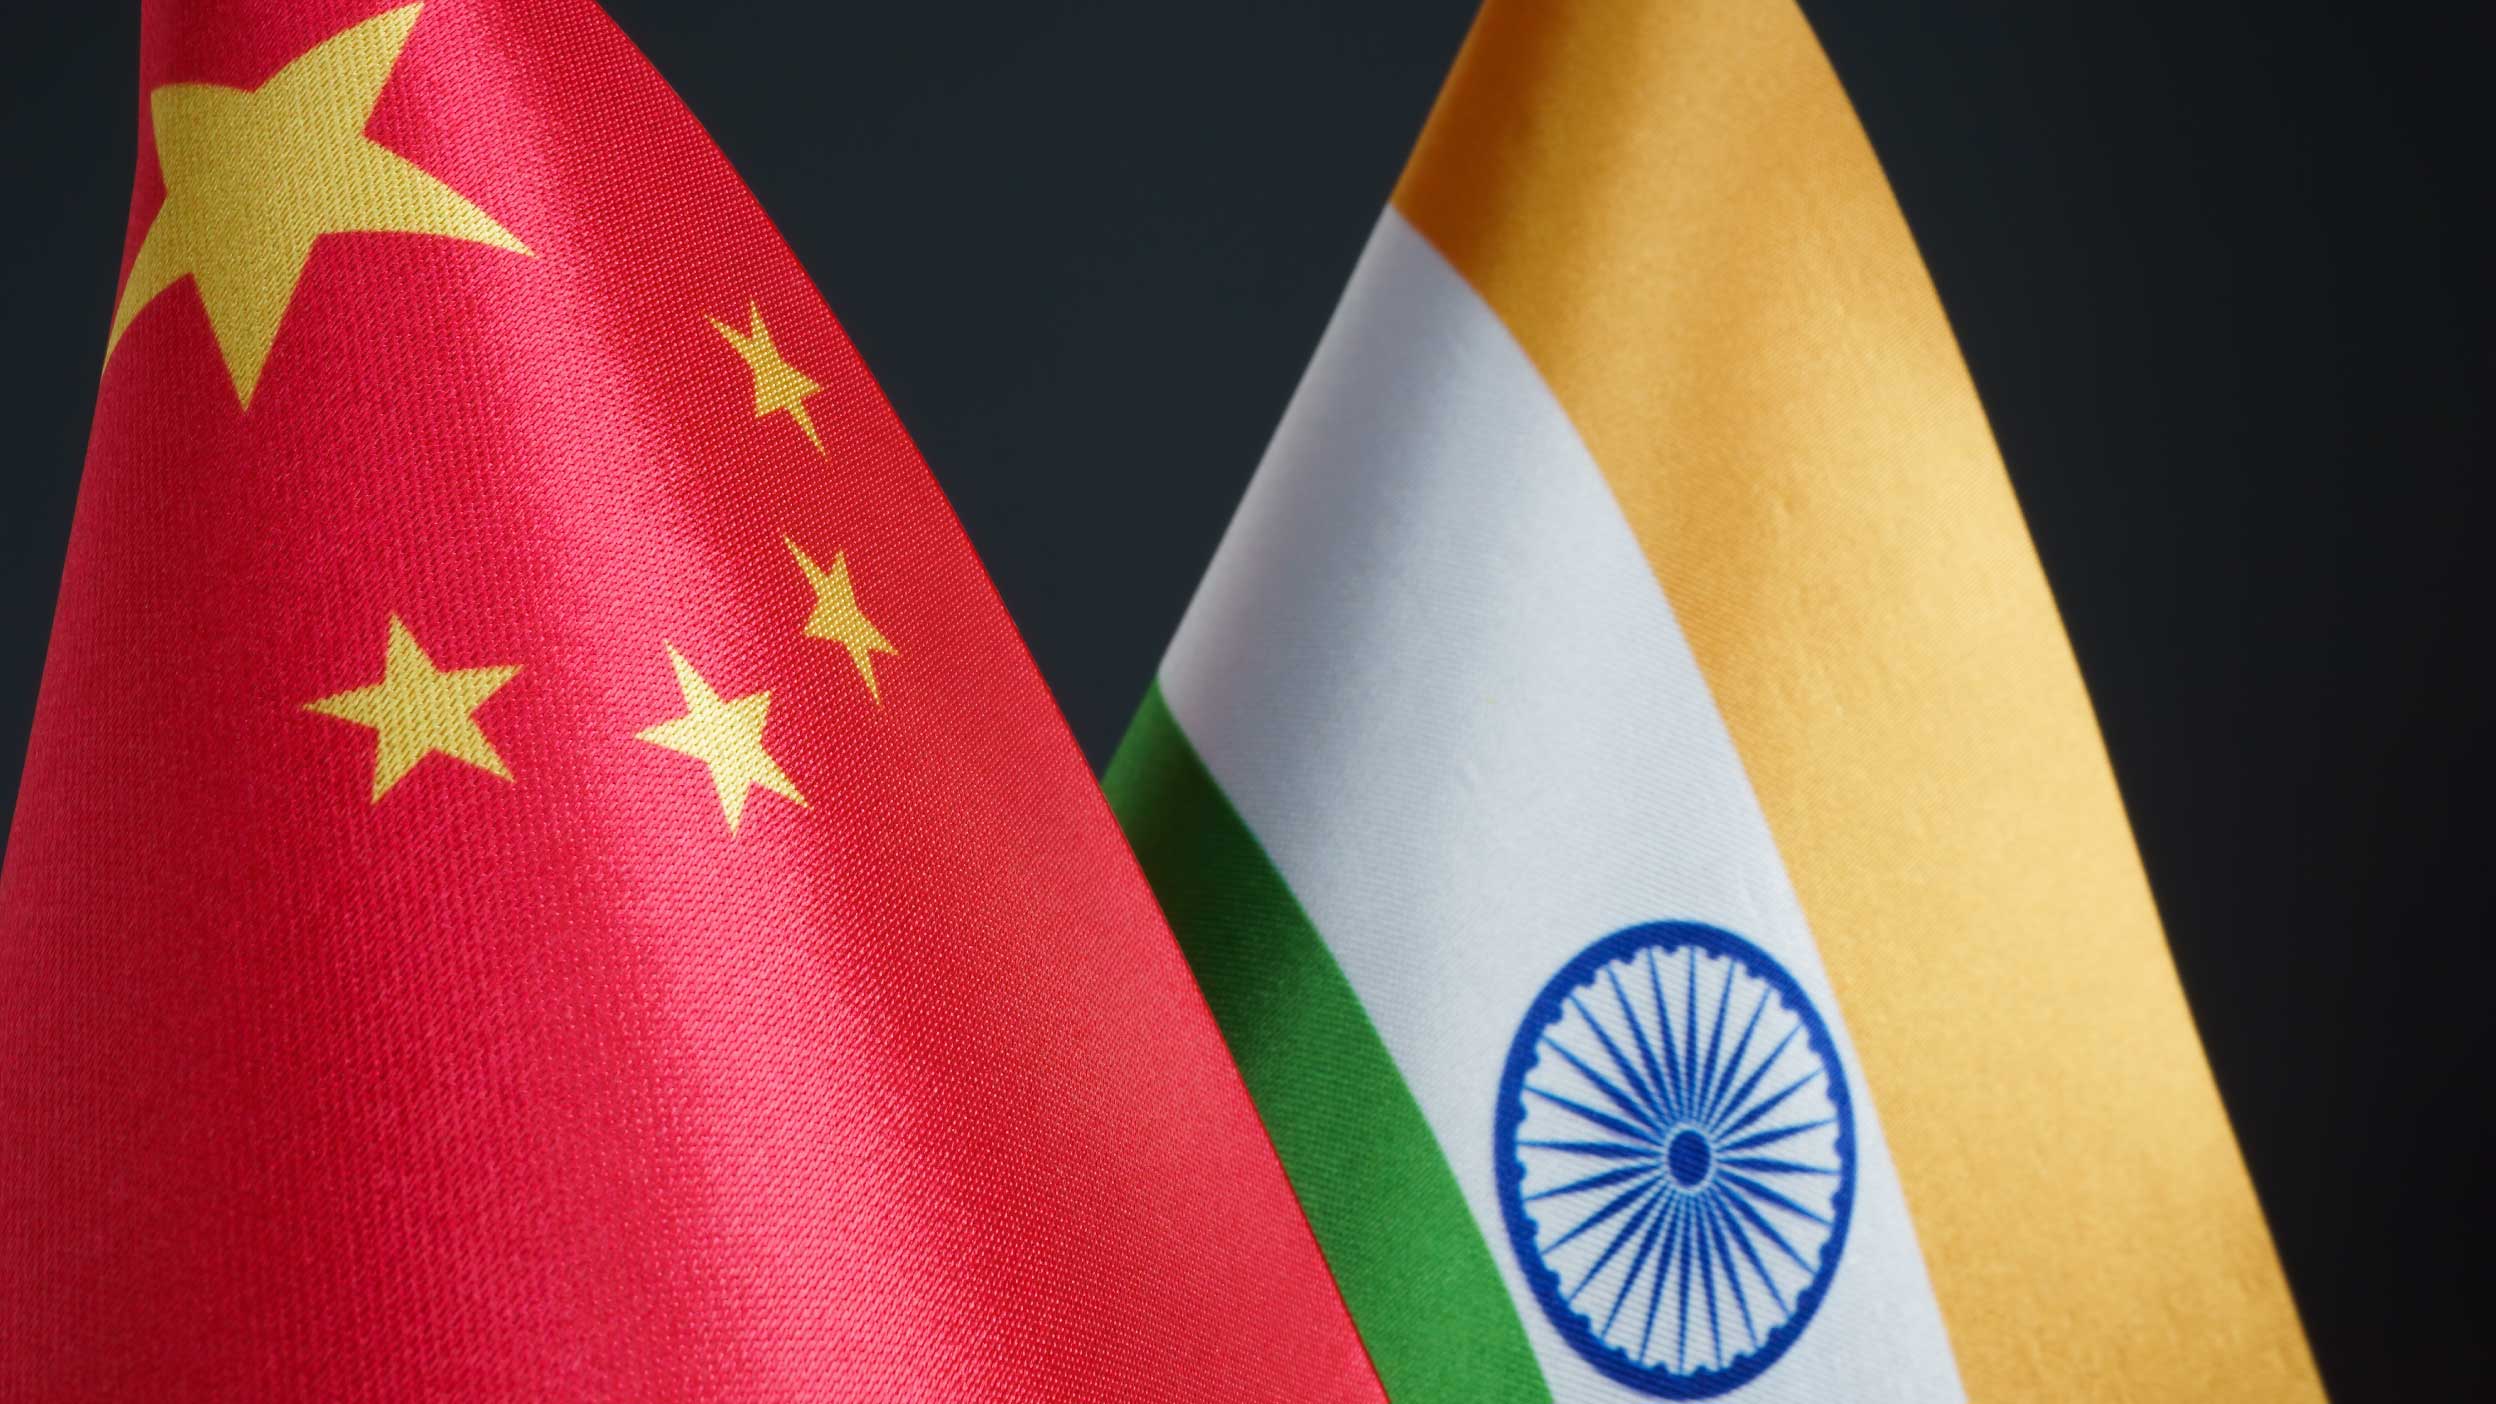 Why China over India?